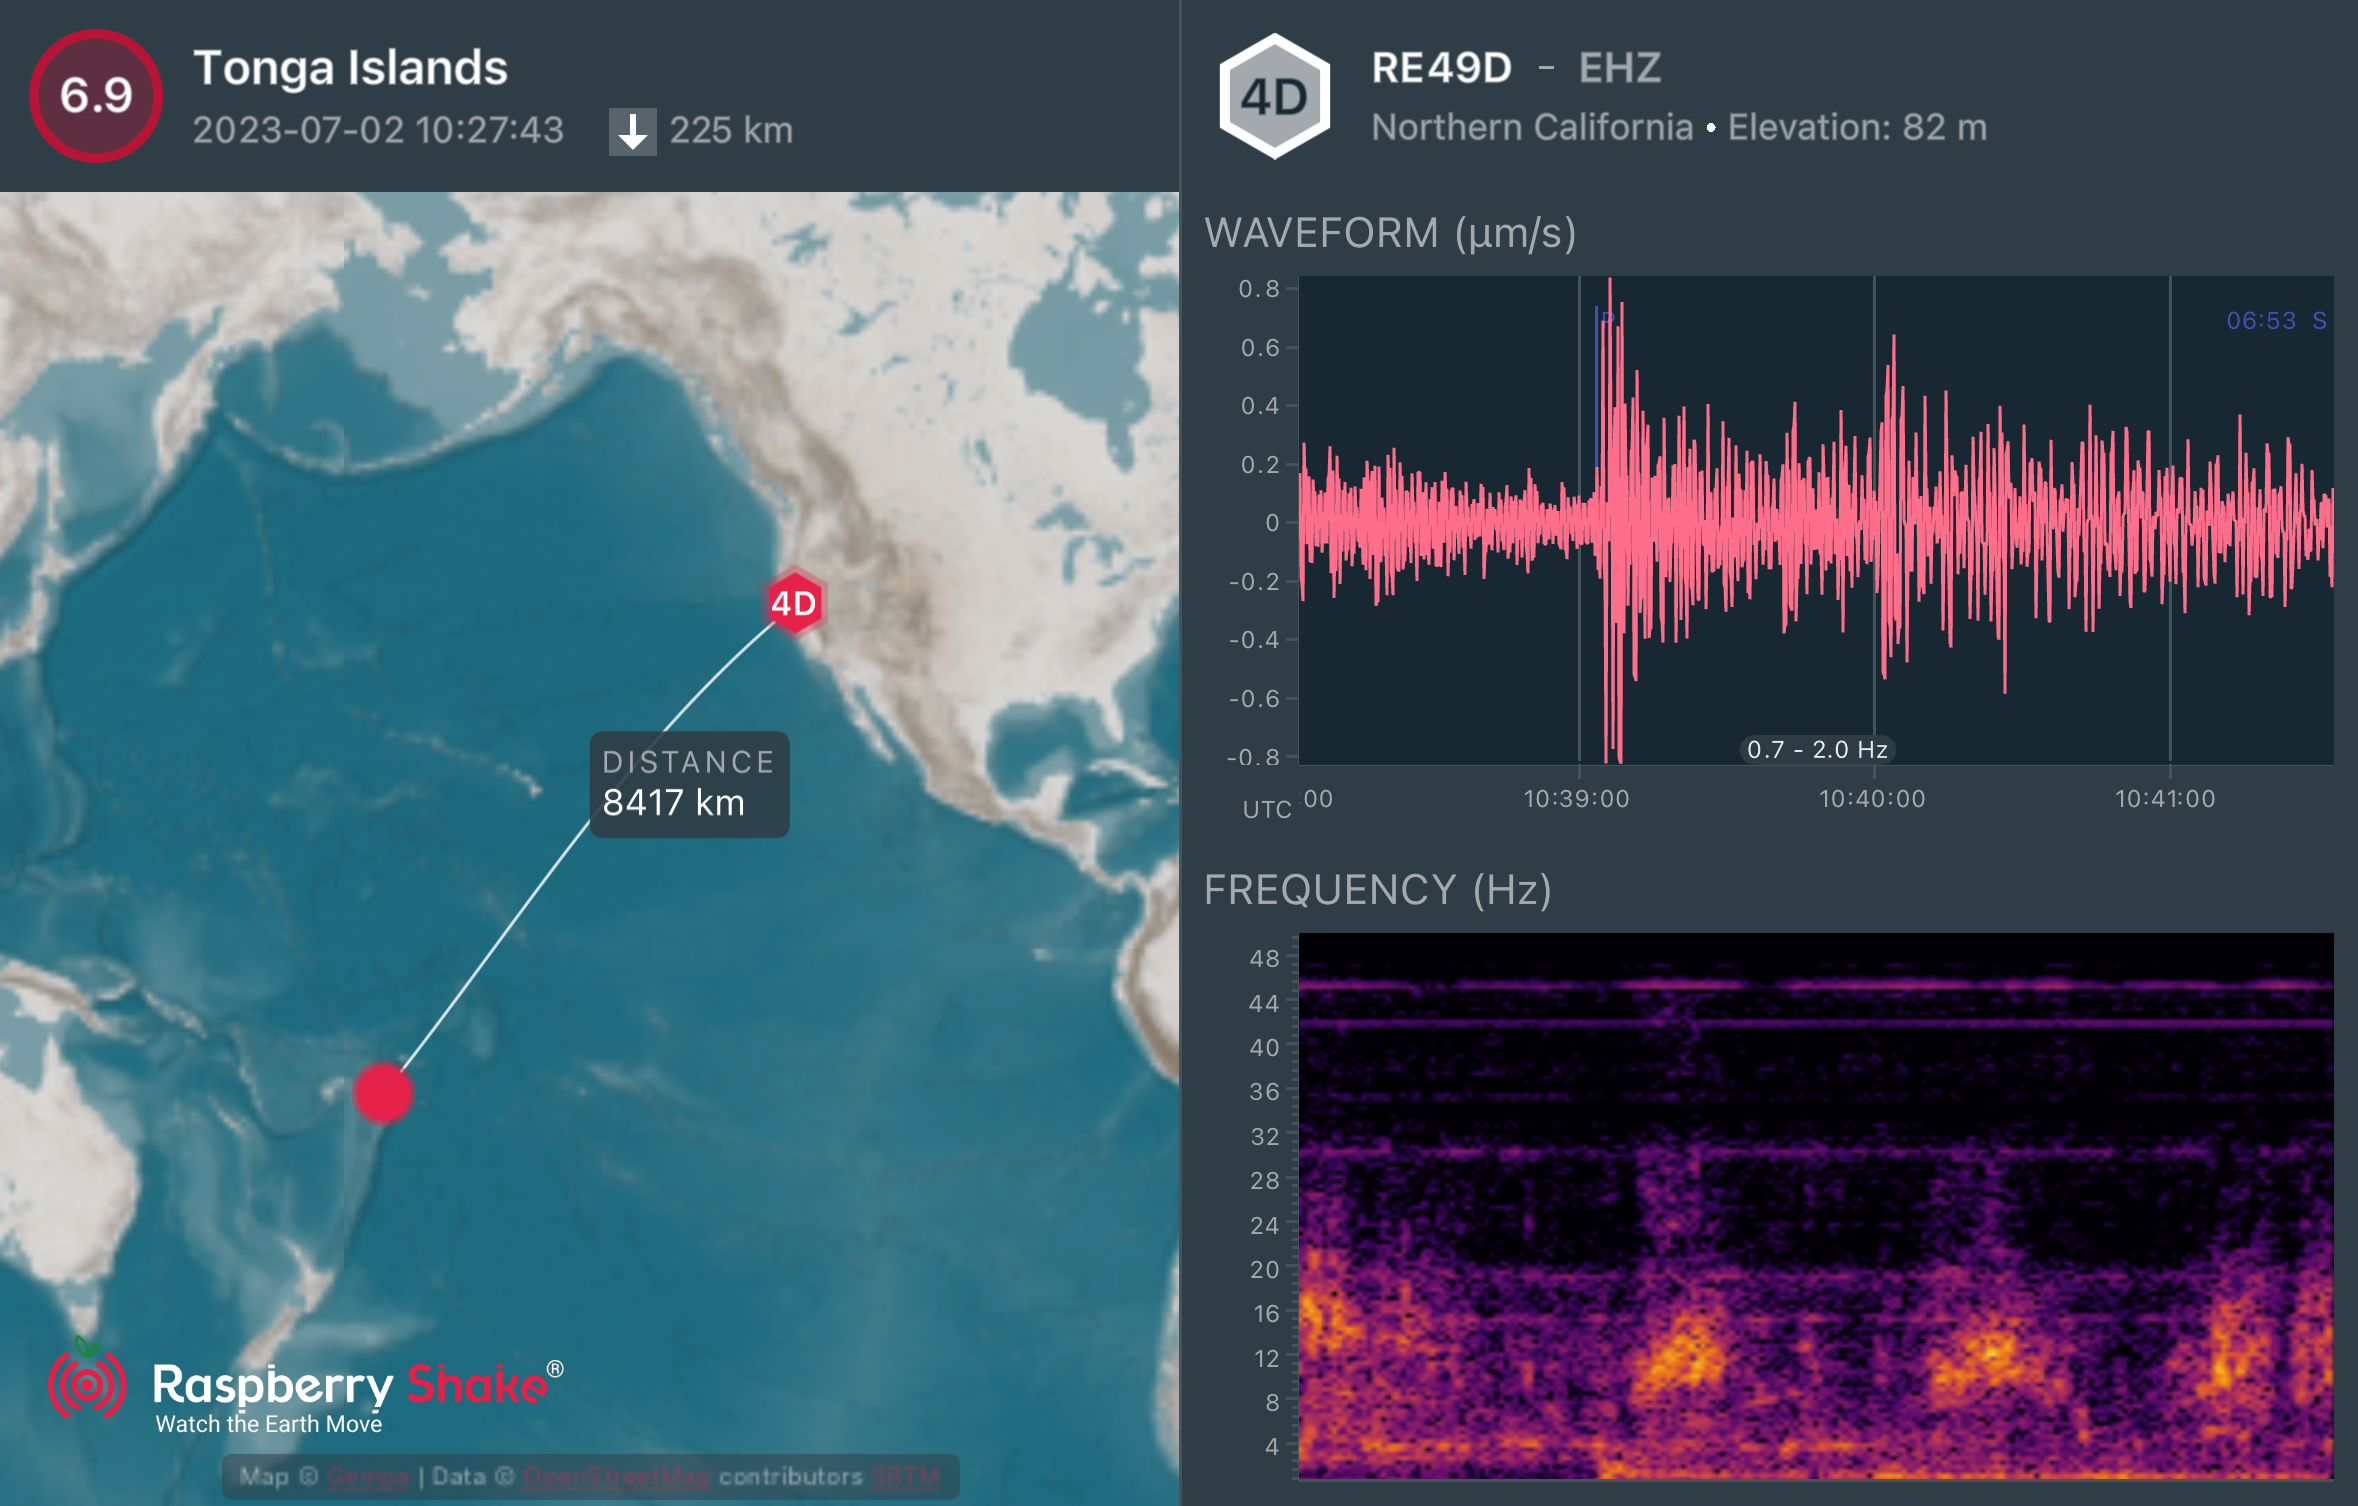 A map and seismogram showing the Tonga earthquake. The RaspberryShake station is RE49D.